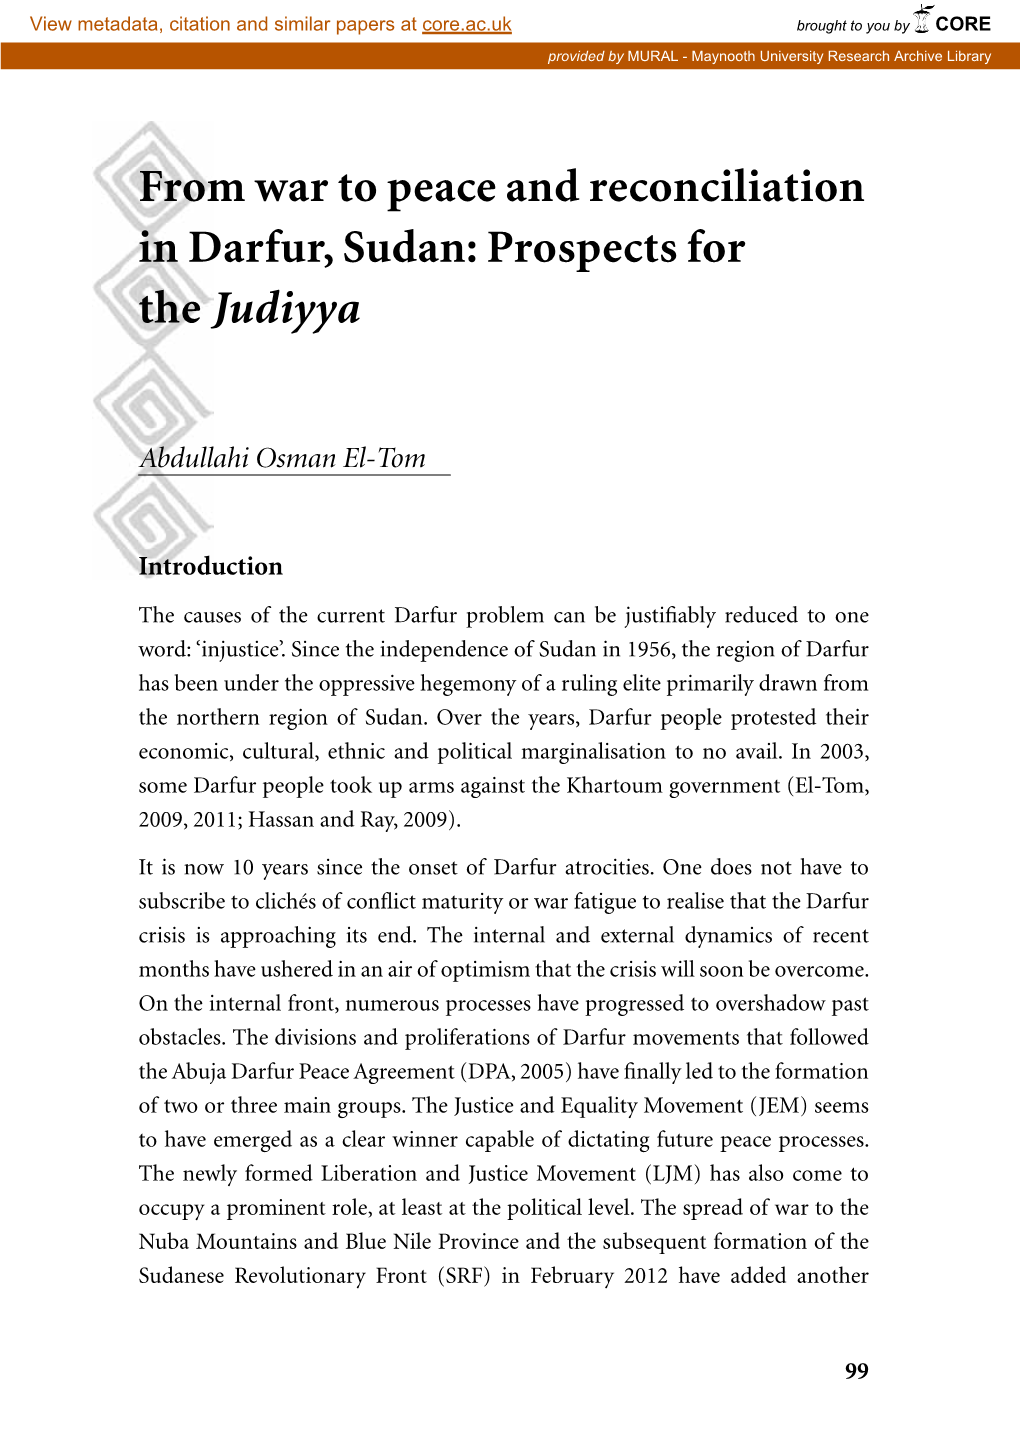 From War to Peace and Reconciliation in Darfur, Sudan: Prospects for the Judiyya